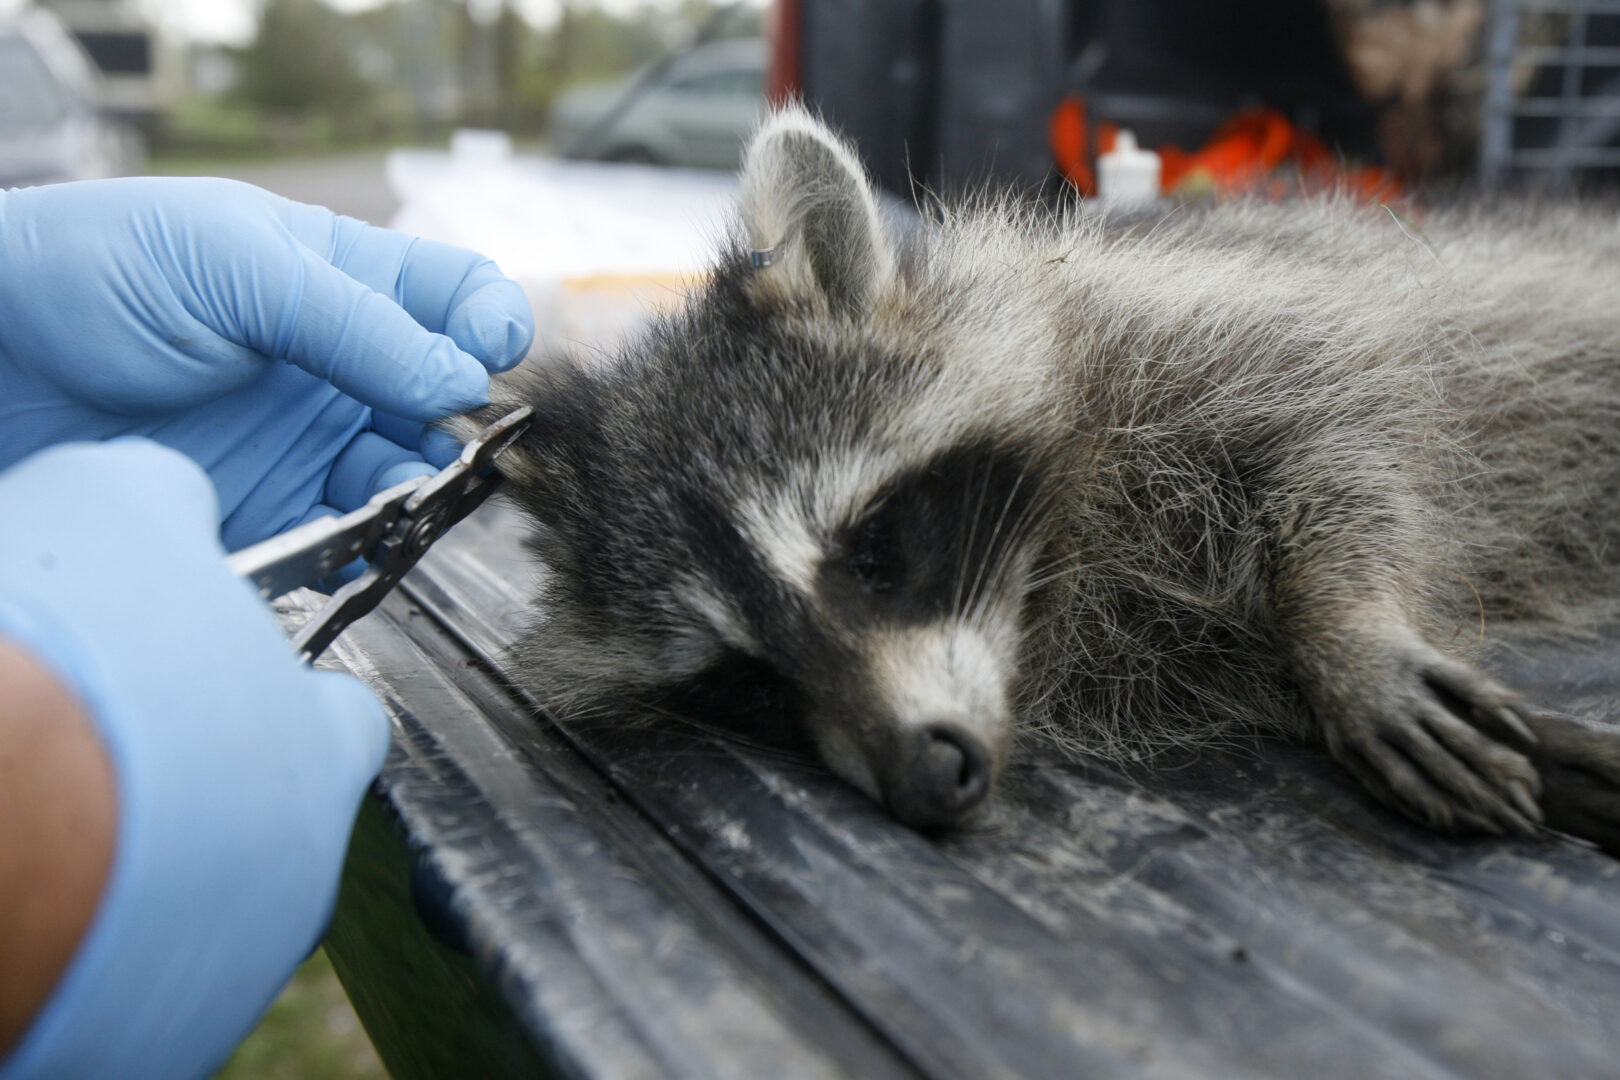 FILE - A tranquillized raccoon has its ear tagged by U.S. Department of Agriculture wildlife specialist Robert Acabbo in Grand Isle, Vt., Thursday, Sept. 27, 2007.  The U.S. government has begun scattering millions of packets of oral rabies vaccine from helicopters and planes over 13 states from Maine to Alabama. The major aim is to keep raccoons from spreading their strain of the deadly virus to states where it hasn't been found or isn't widespread, said field trial coordinator Jordona Kirby.  (AP Photo/Toby Talbot, File)